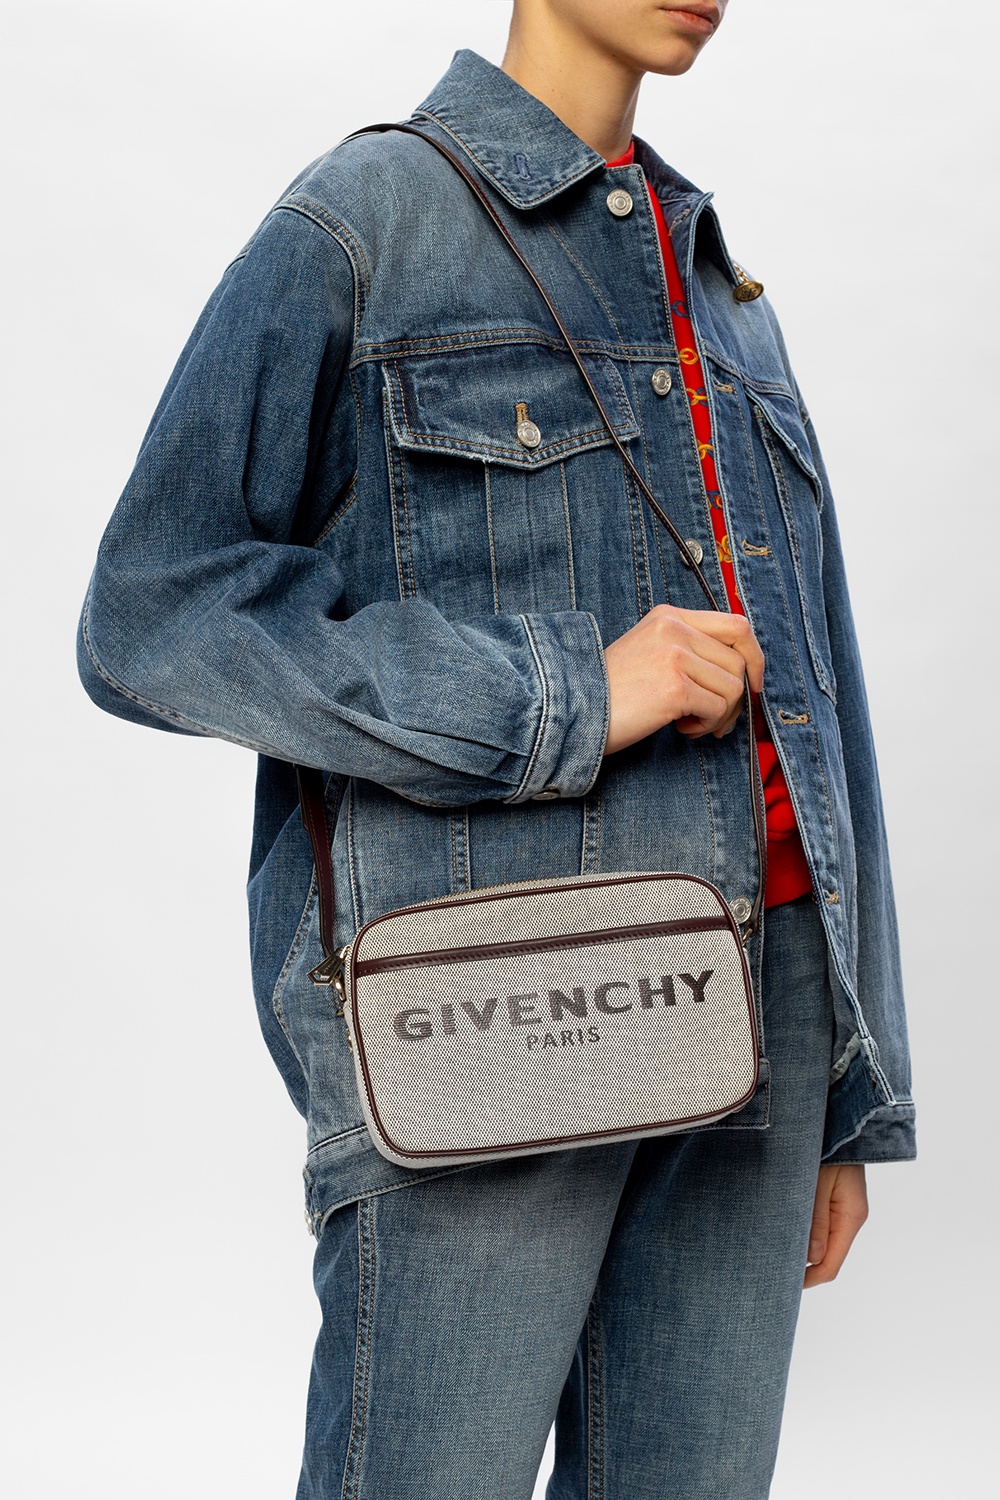 givenchy earrings ‘Camera’ shoulder bag with logo